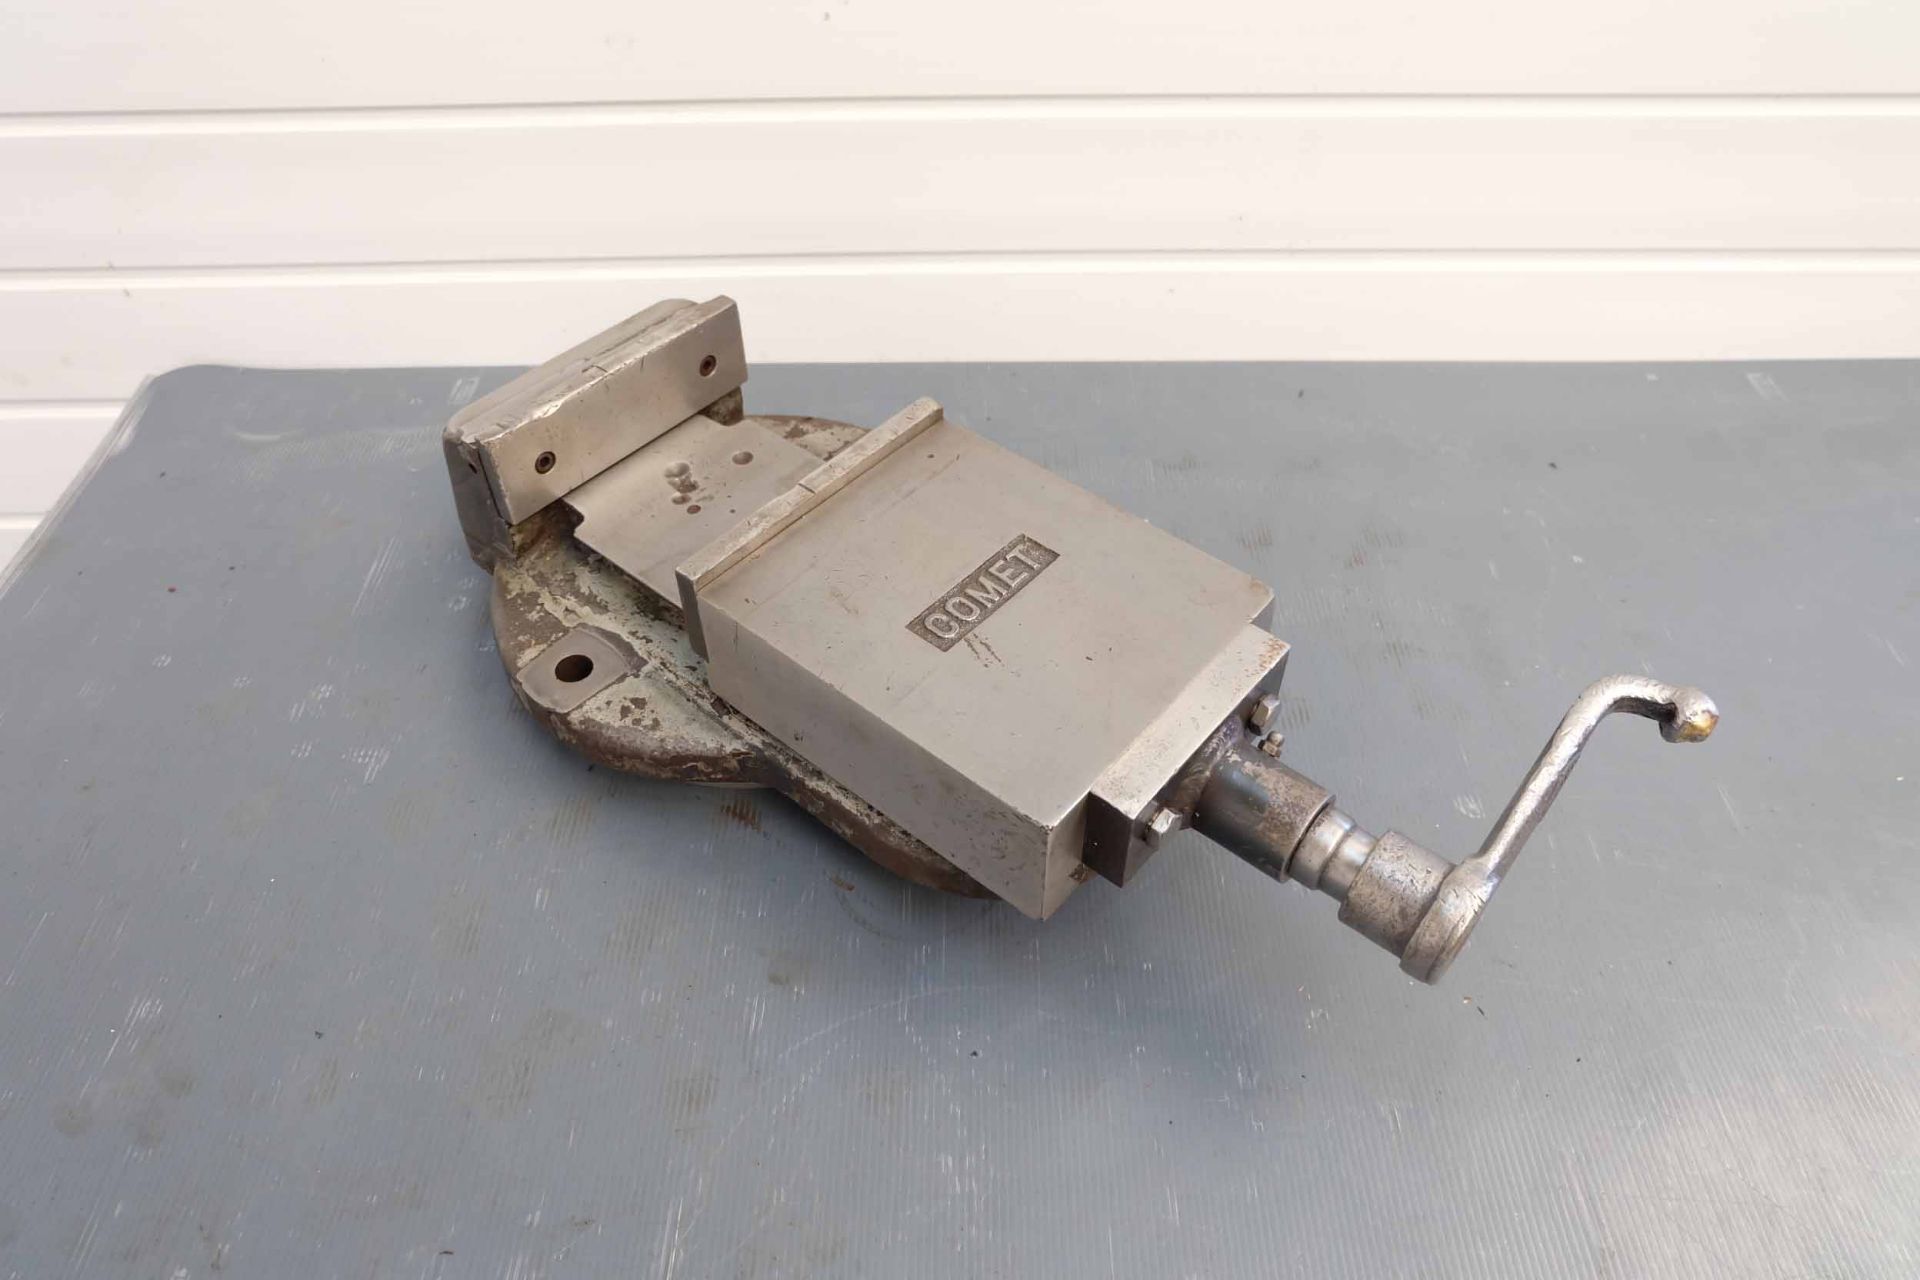 Comet Machine Vice. Jaw Width 6". Jaw Height 2". Max Opening 4 7/8". Overall Height 4".